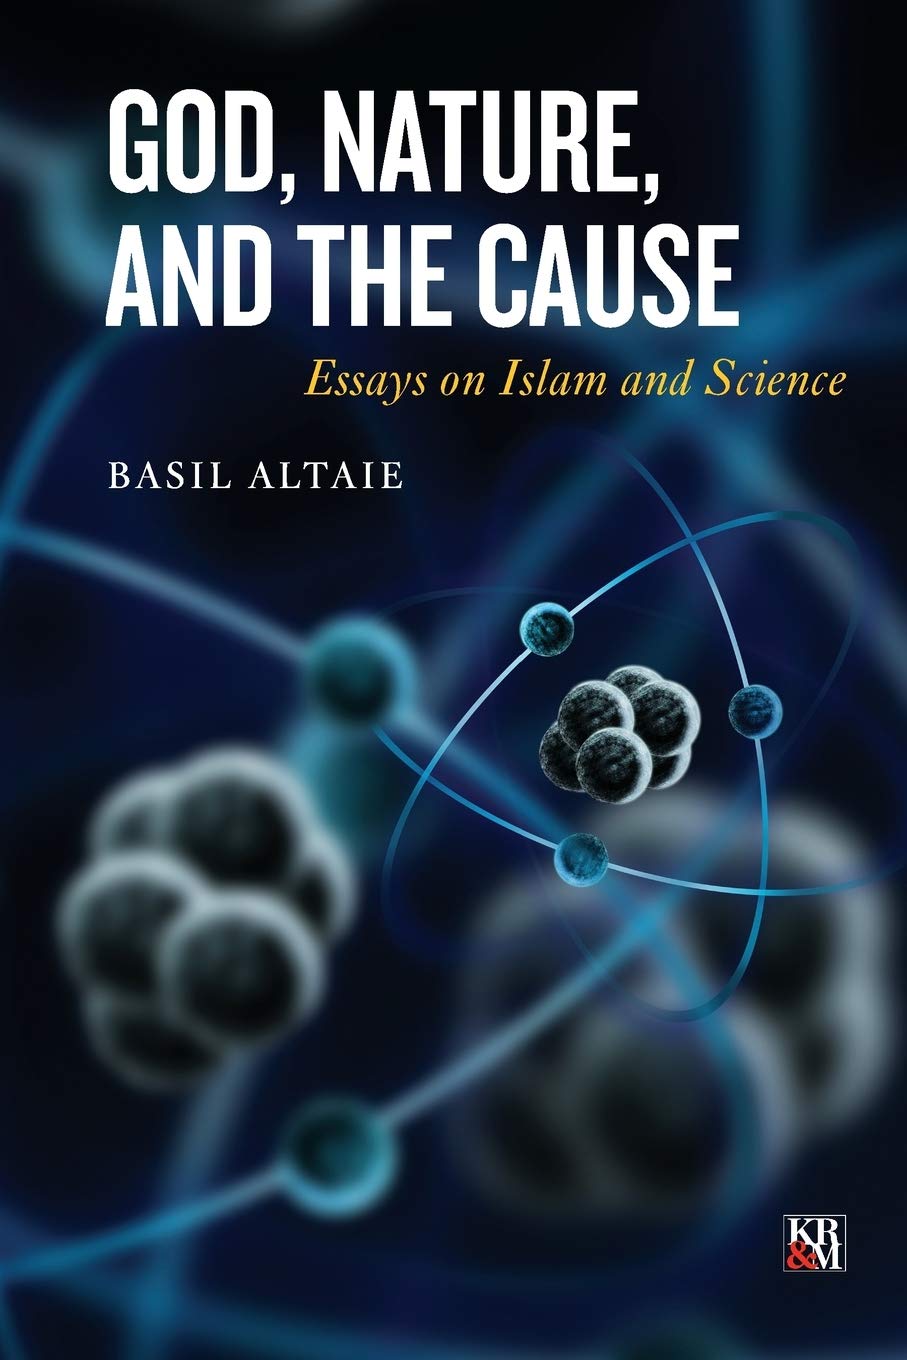 God, Nature, and the Cause: Essays on Islam and Science